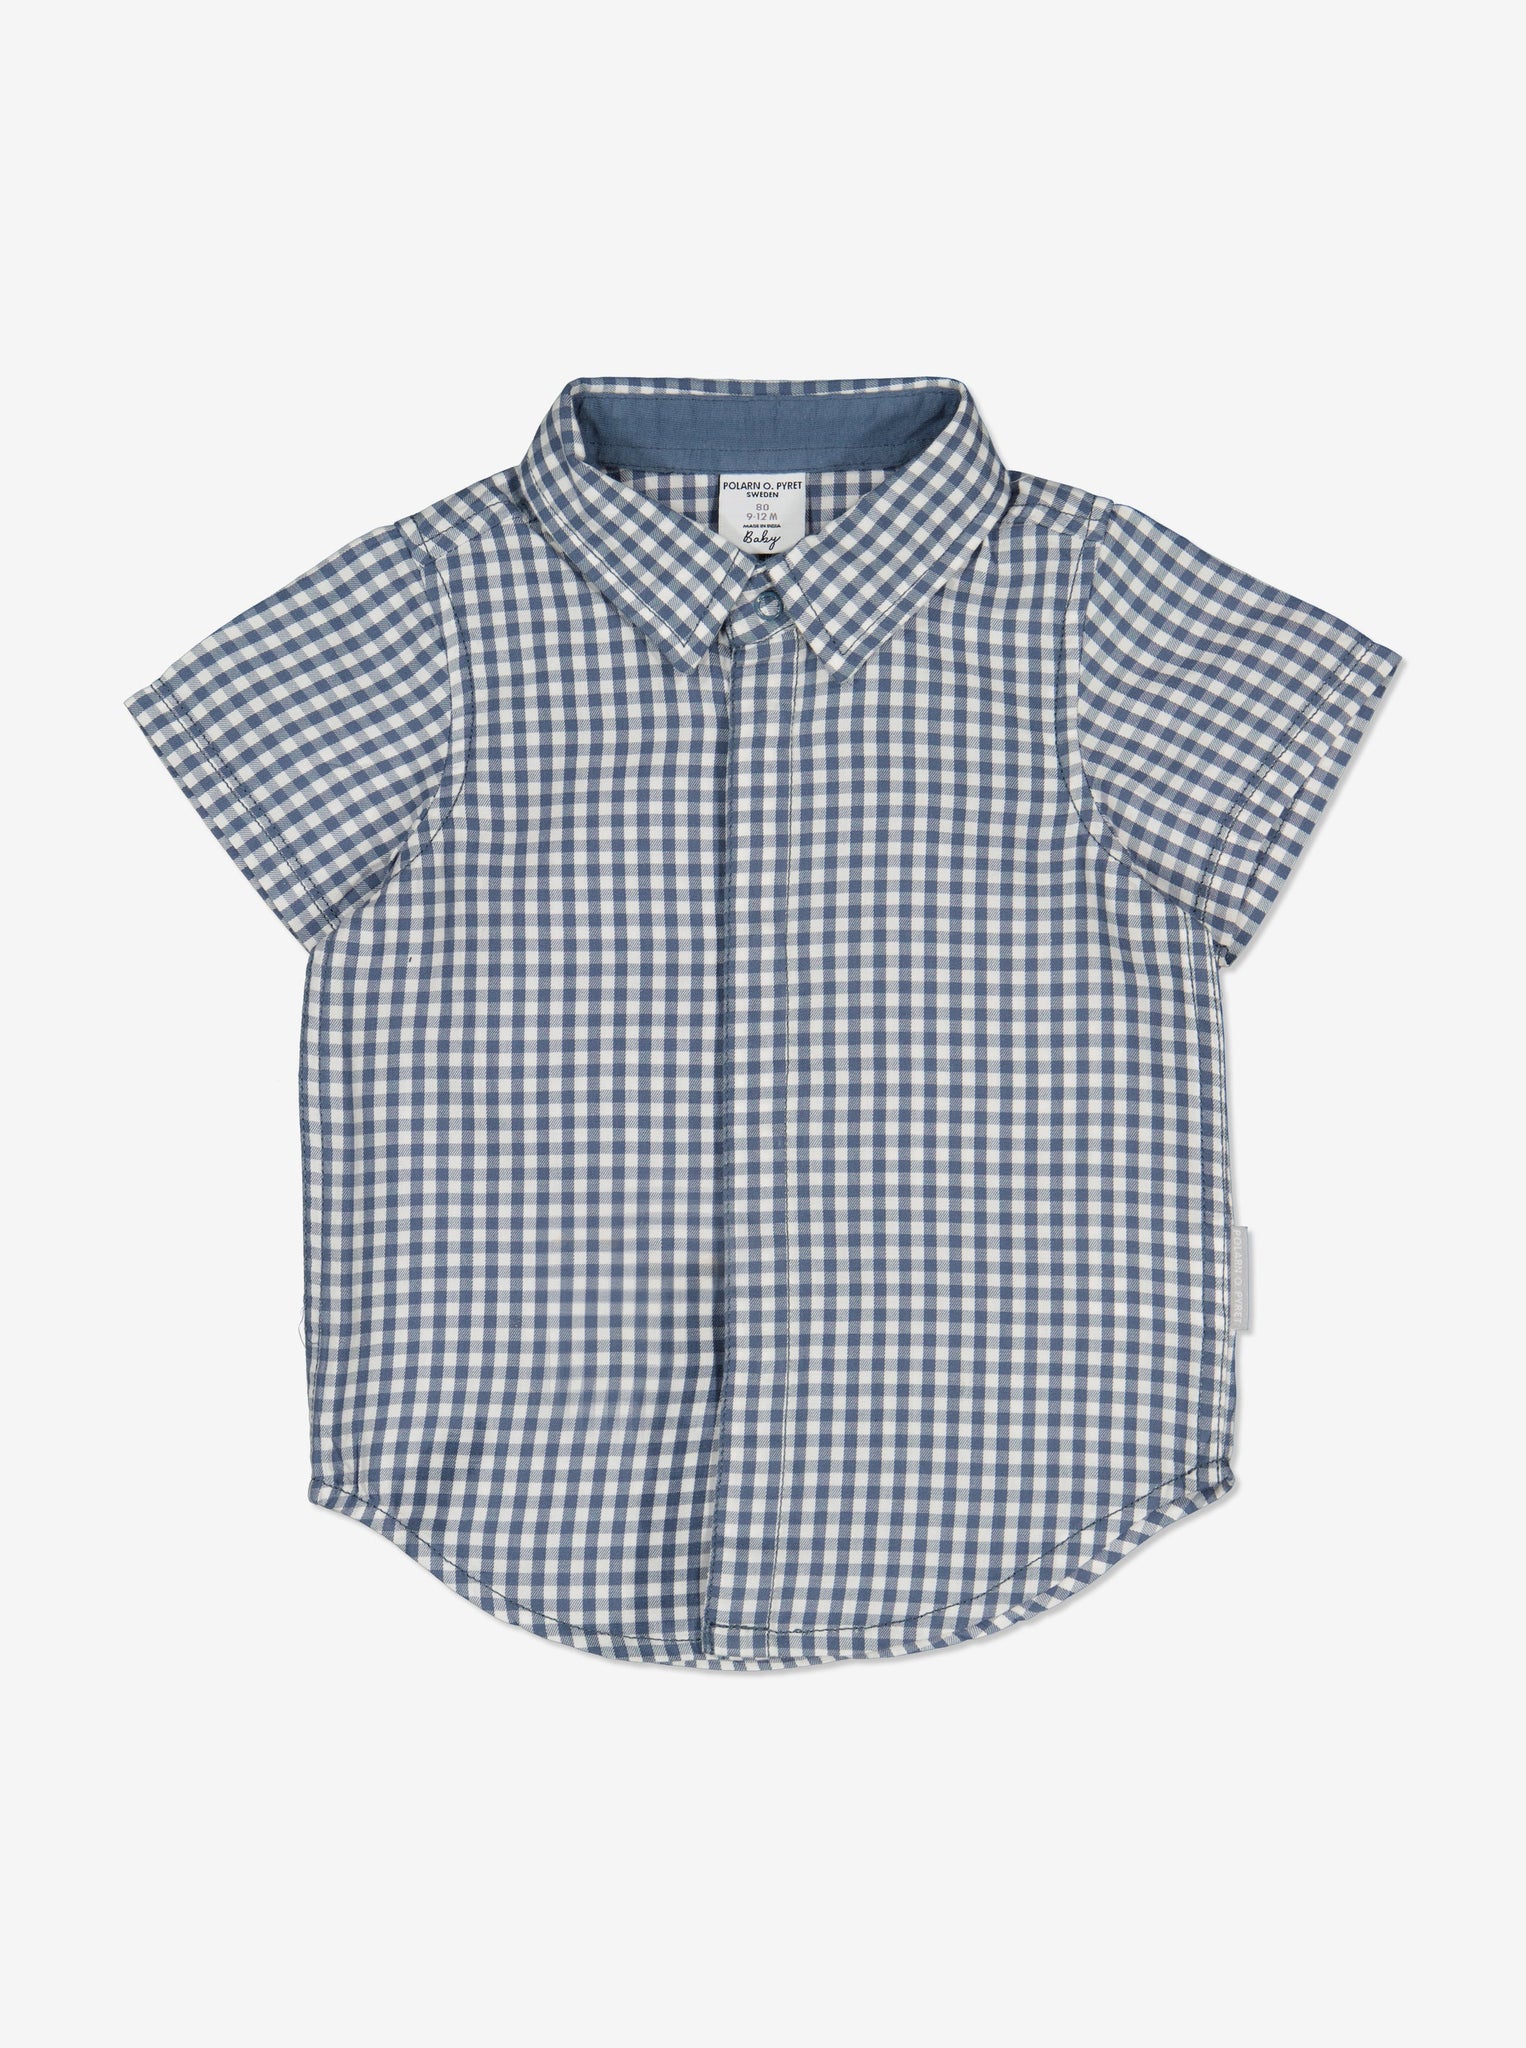 Blue Checked Newborn Baby Shirt from Polarn O. Pyret Kidswear. Made from 100% GOTS Organic Cotton.